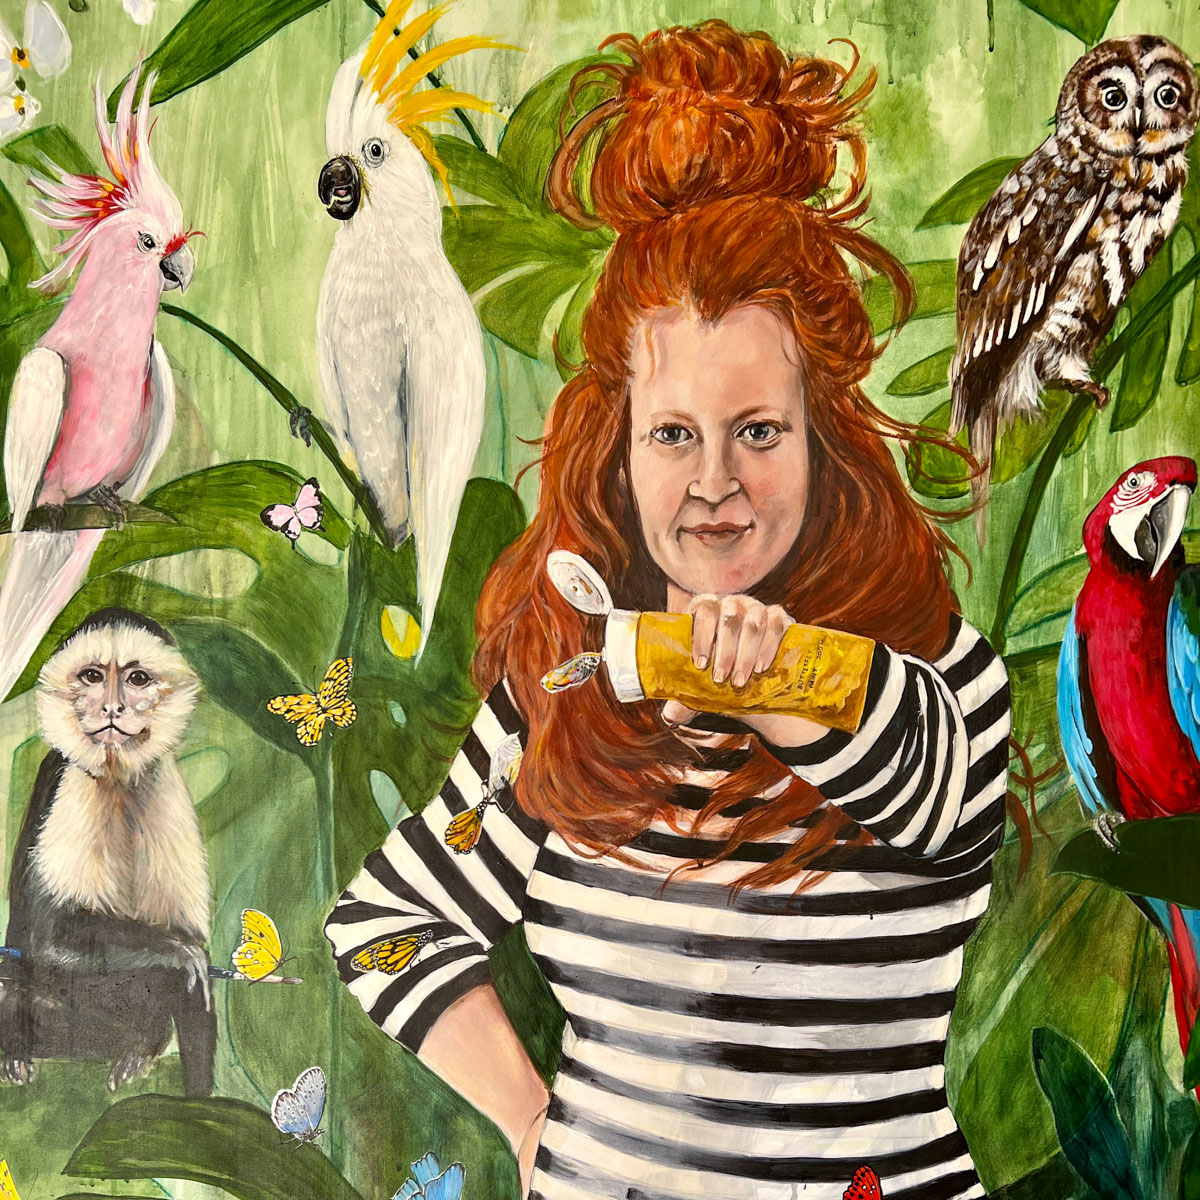 Painting of the artist wearing striped shirt with cockatoos, parot, owl and monkey in a forest - Emma Ward - Draw Creative